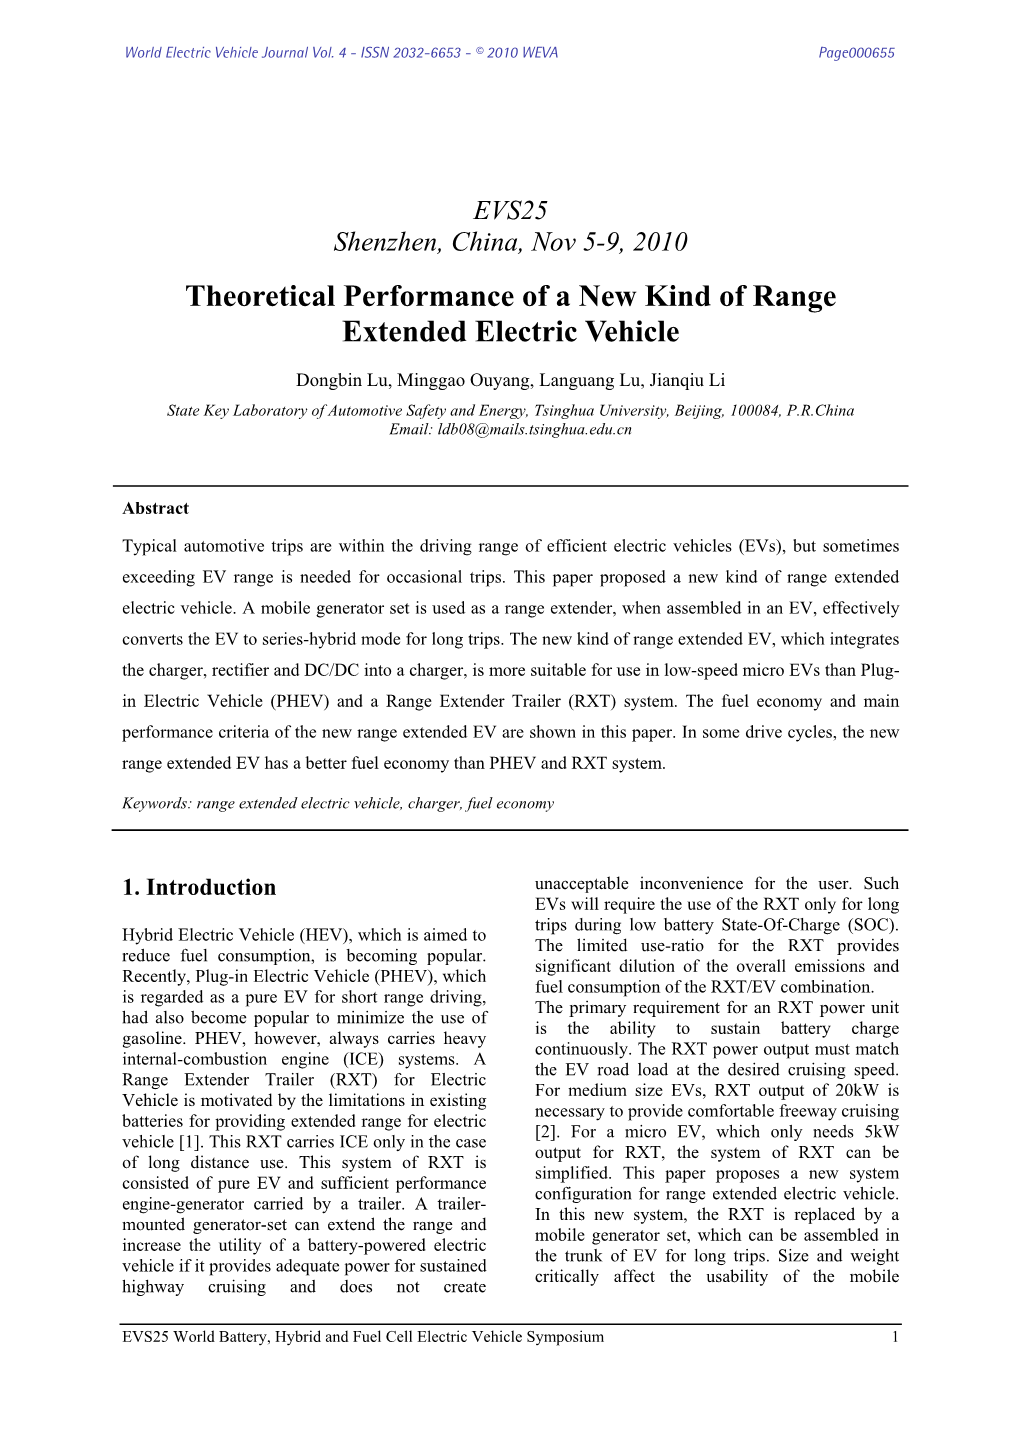 Theoretical Performance of a New Kind of Range Extended Electric Vehicle